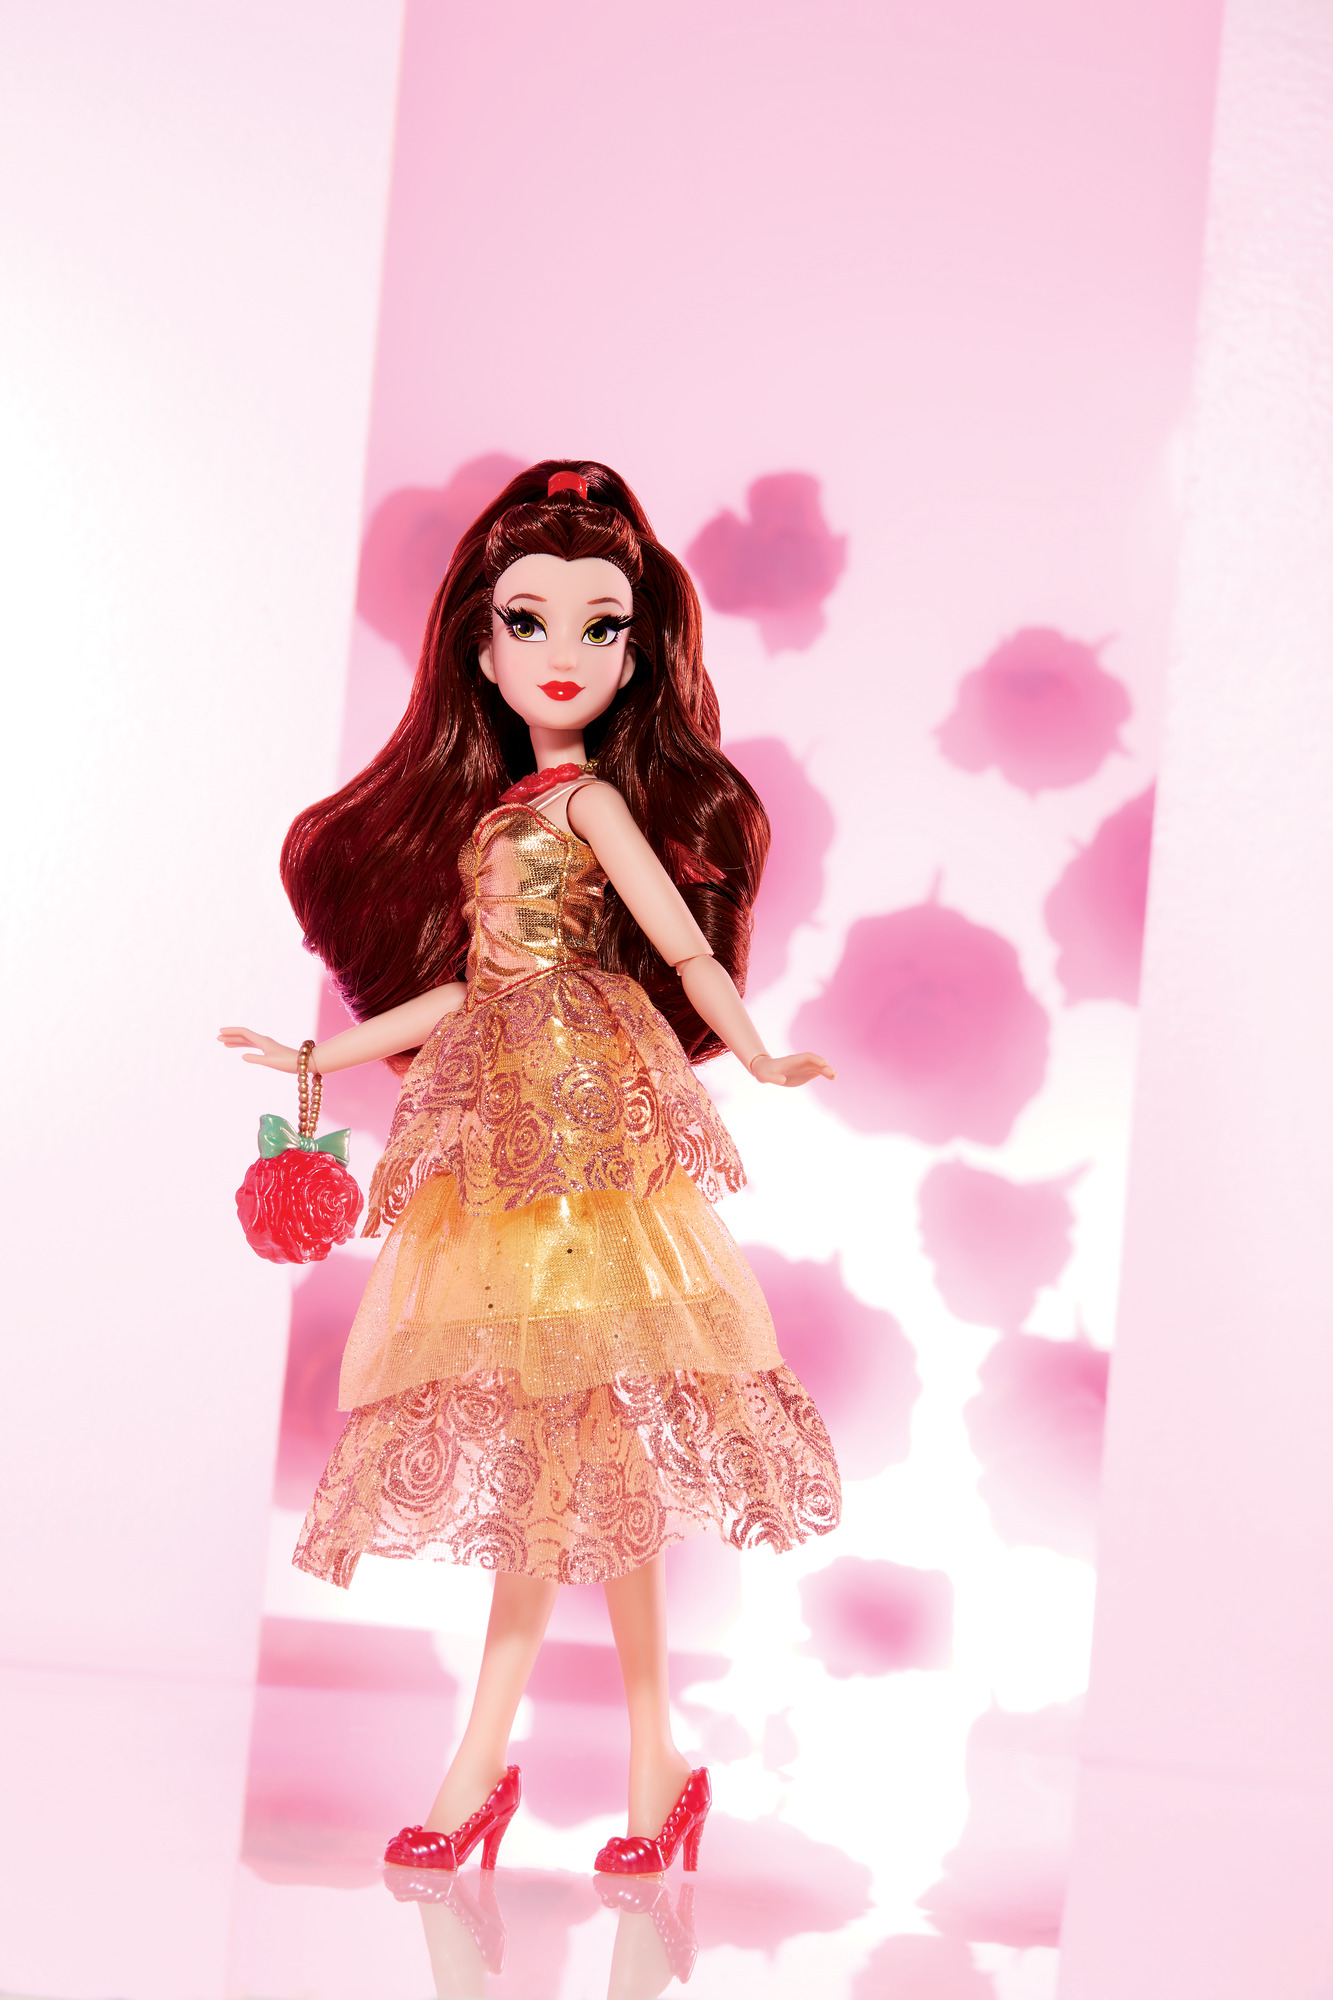 Disney Princess Style Series, Belle Fashion Doll In Contemporary Style - image 8 of 9